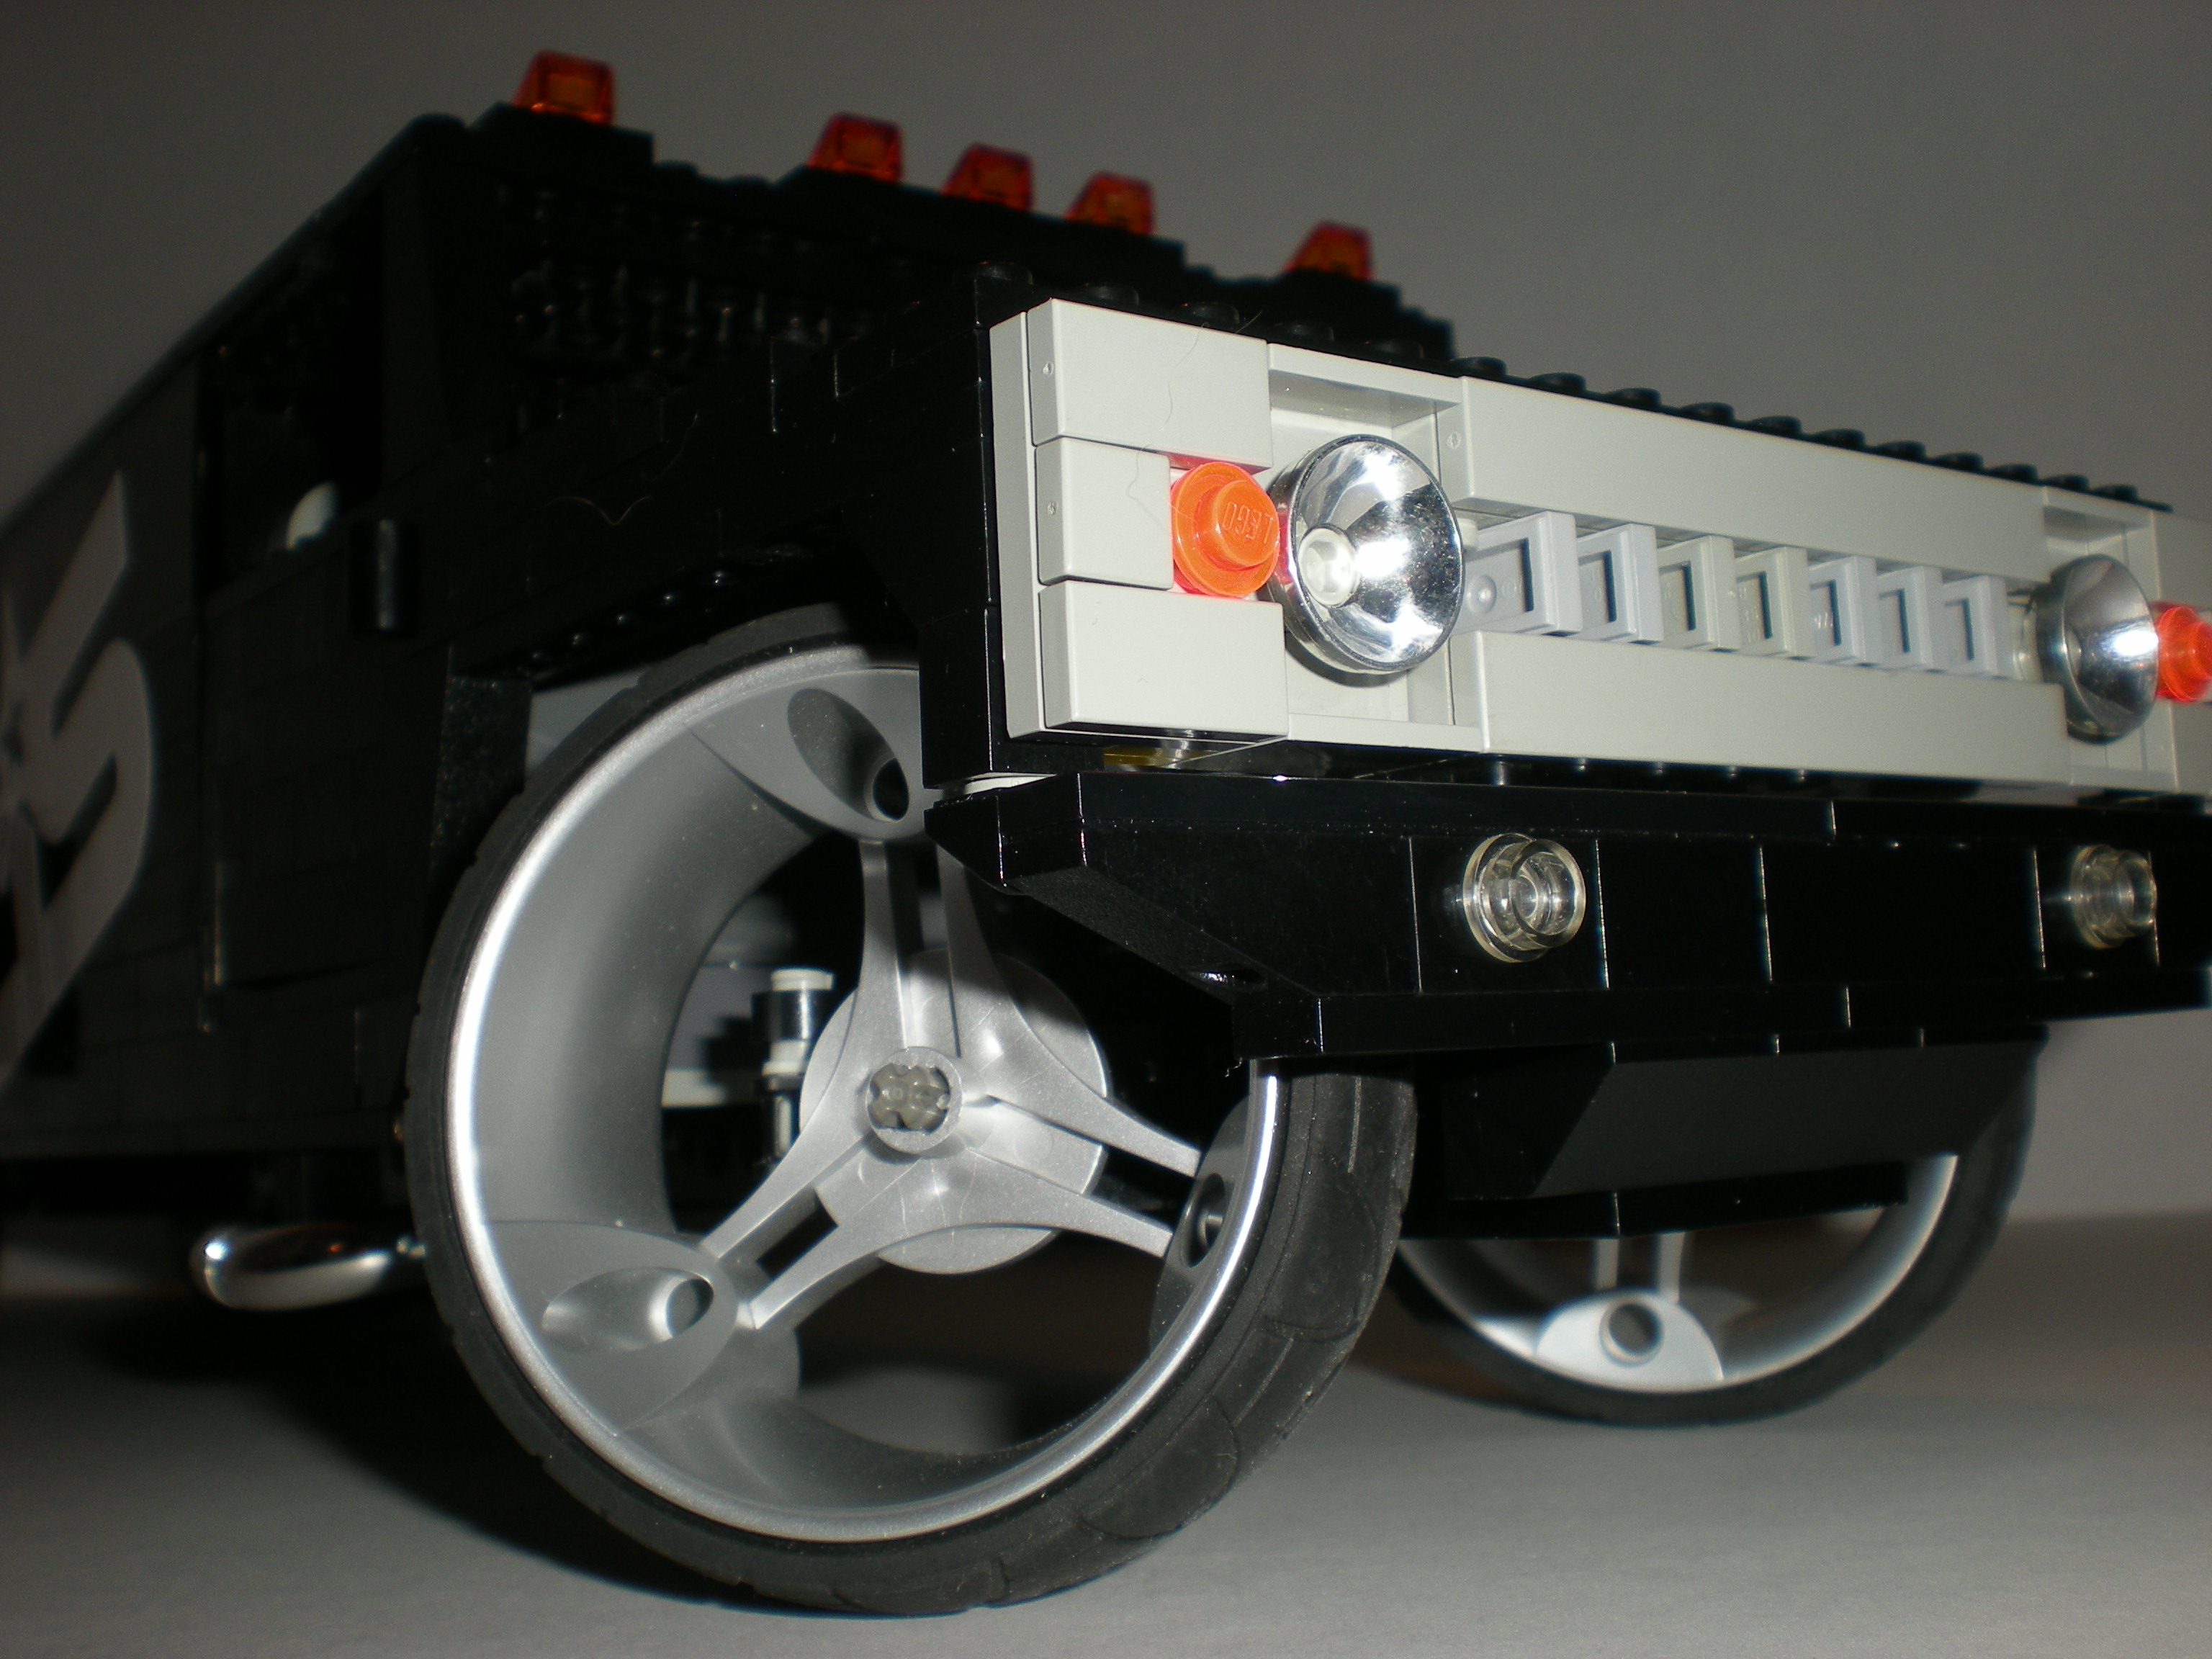 Lego Hummer H2 SUT Stretch Limo | Flickr - Photo Sharing!